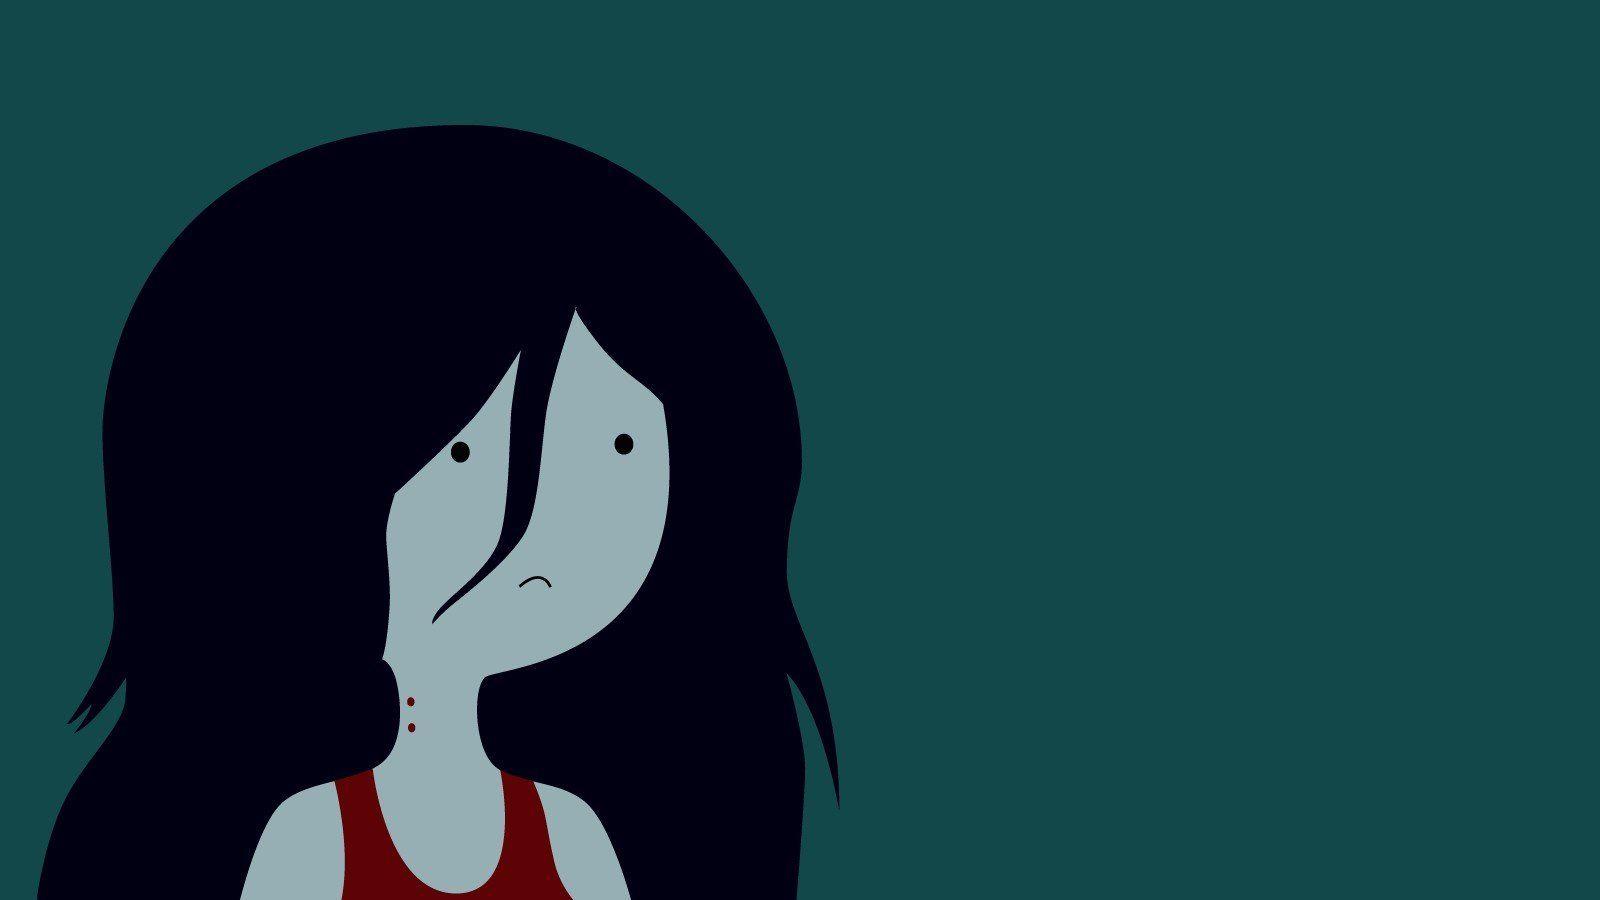 Wallpaper ID 378701  TV Show Adventure Time Phone Wallpaper Marceline  Adventure Time Jake Adventure Time BMO Adventure Time 1080x2160  free download